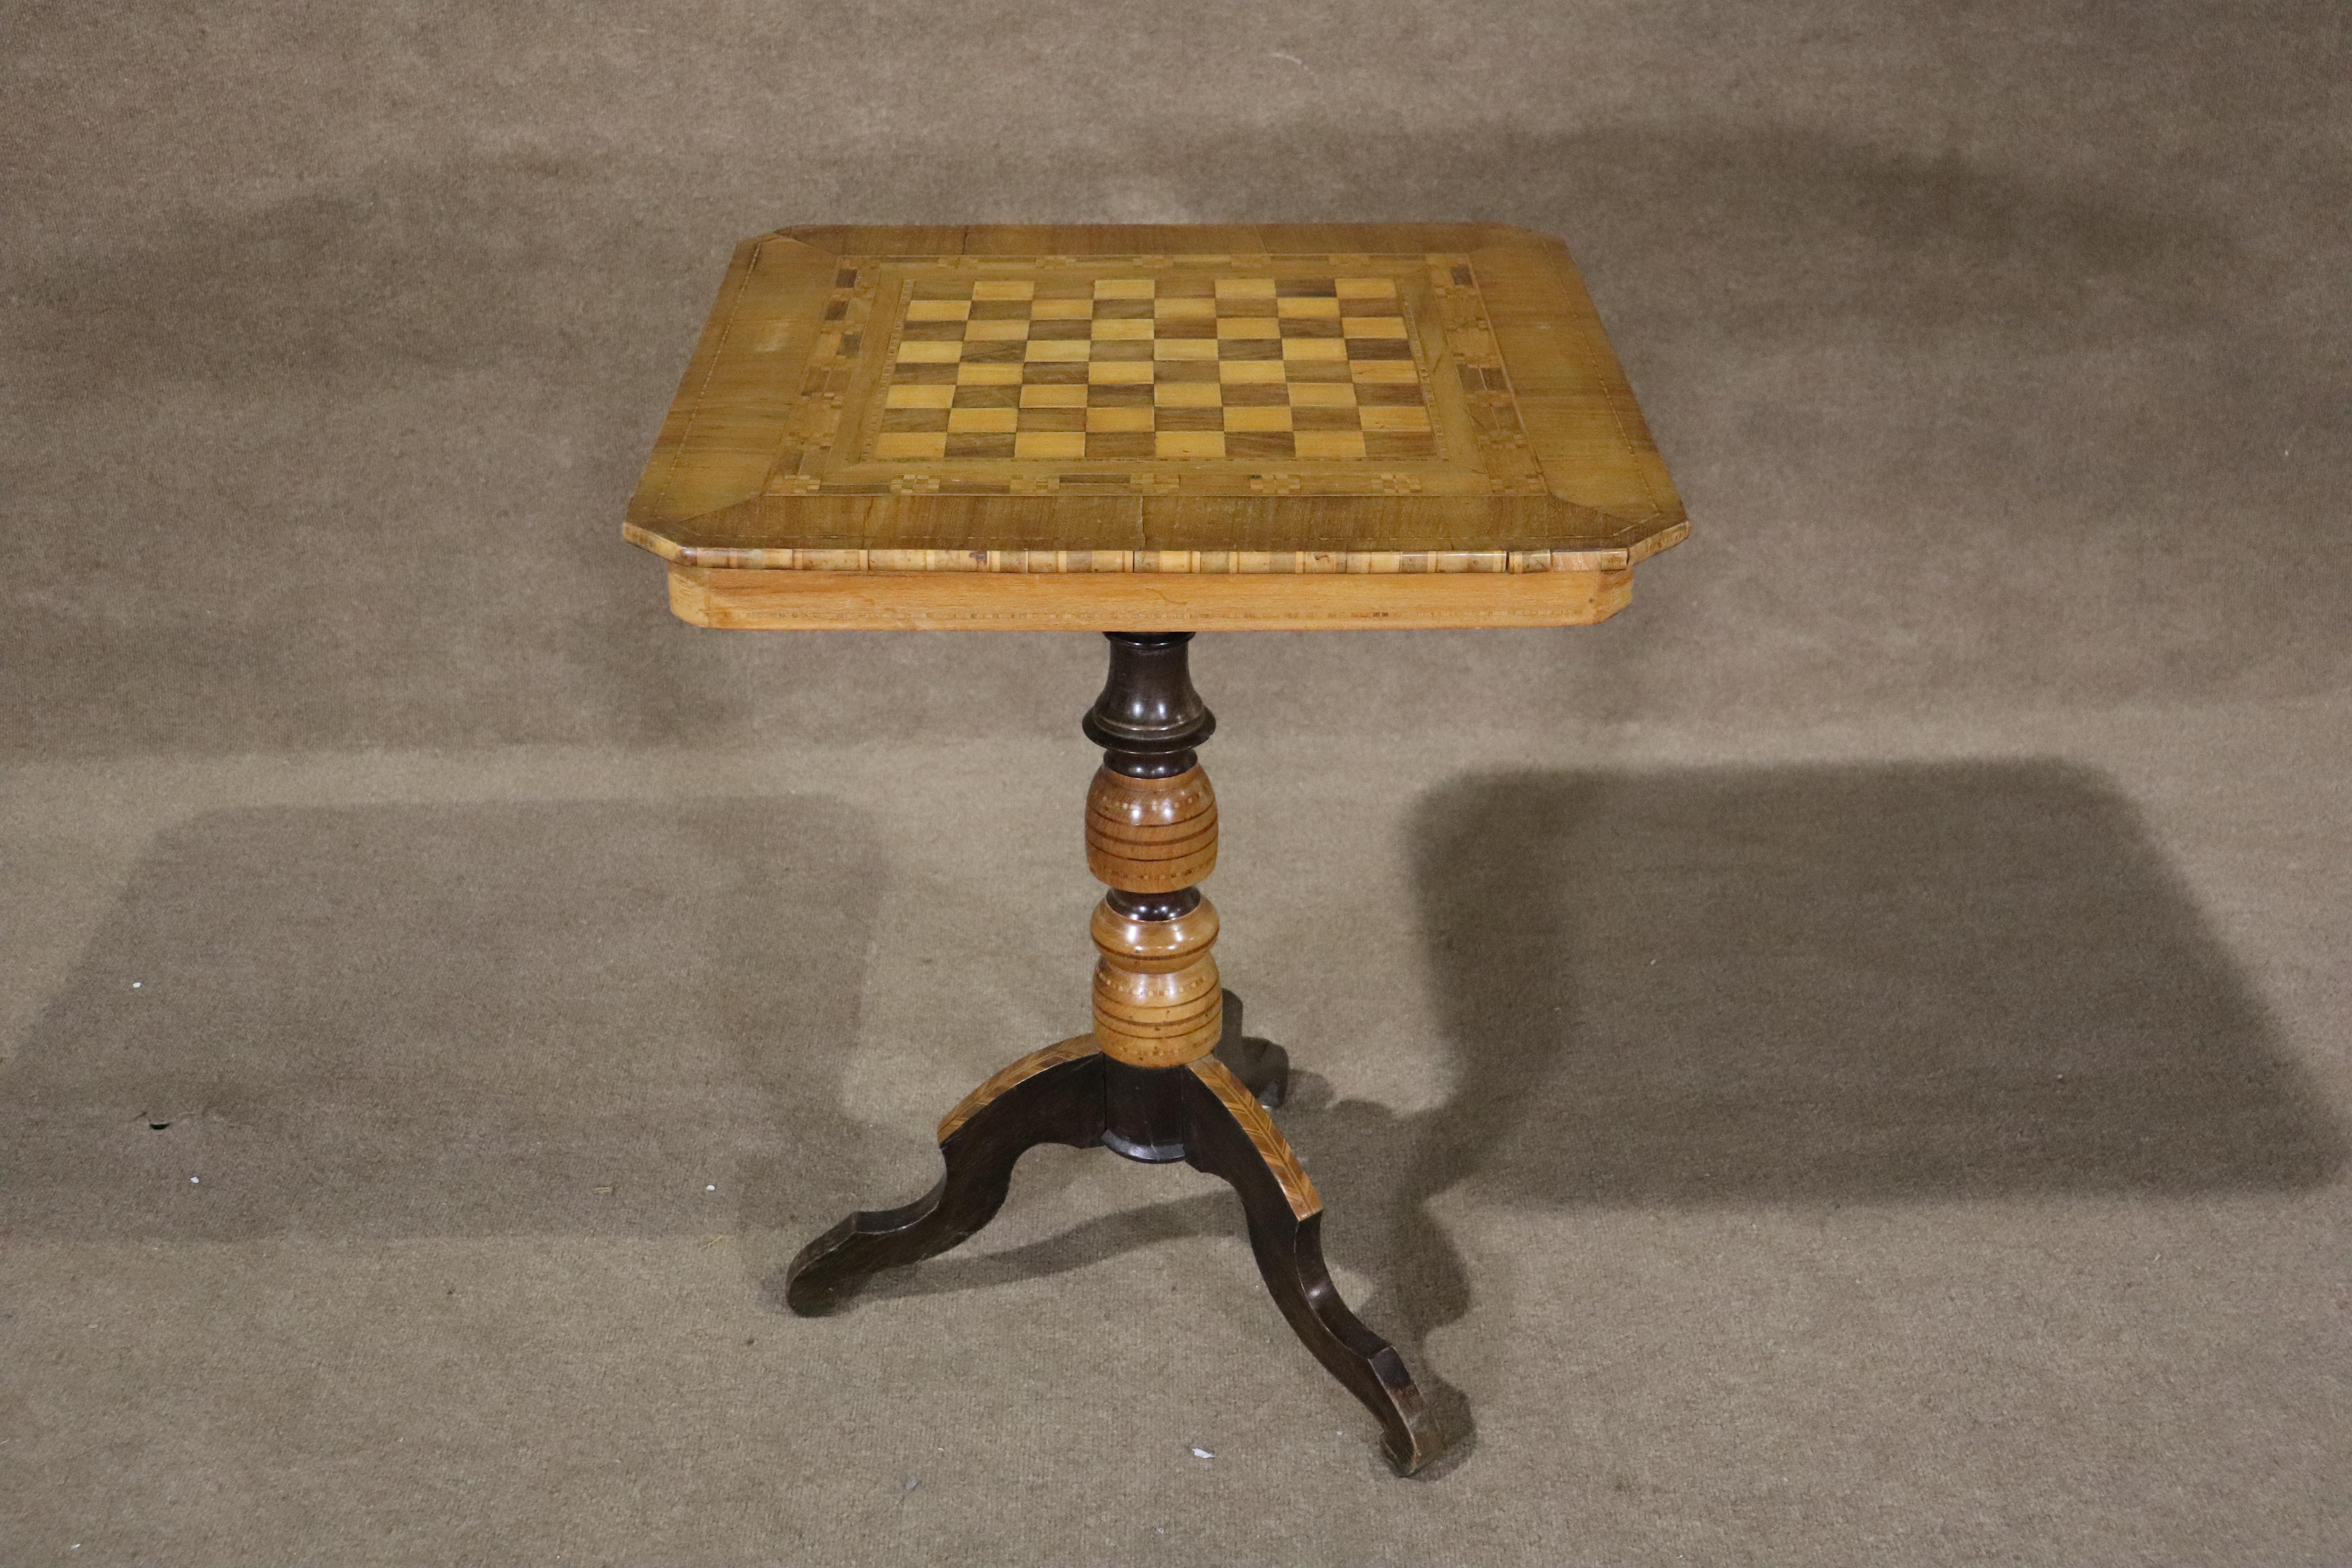 Small game table with inlay wood grain designs making up the chess board, trim and outer detailing. Makes a pretty side table or plant stand.
Please confirm location NY or NJ